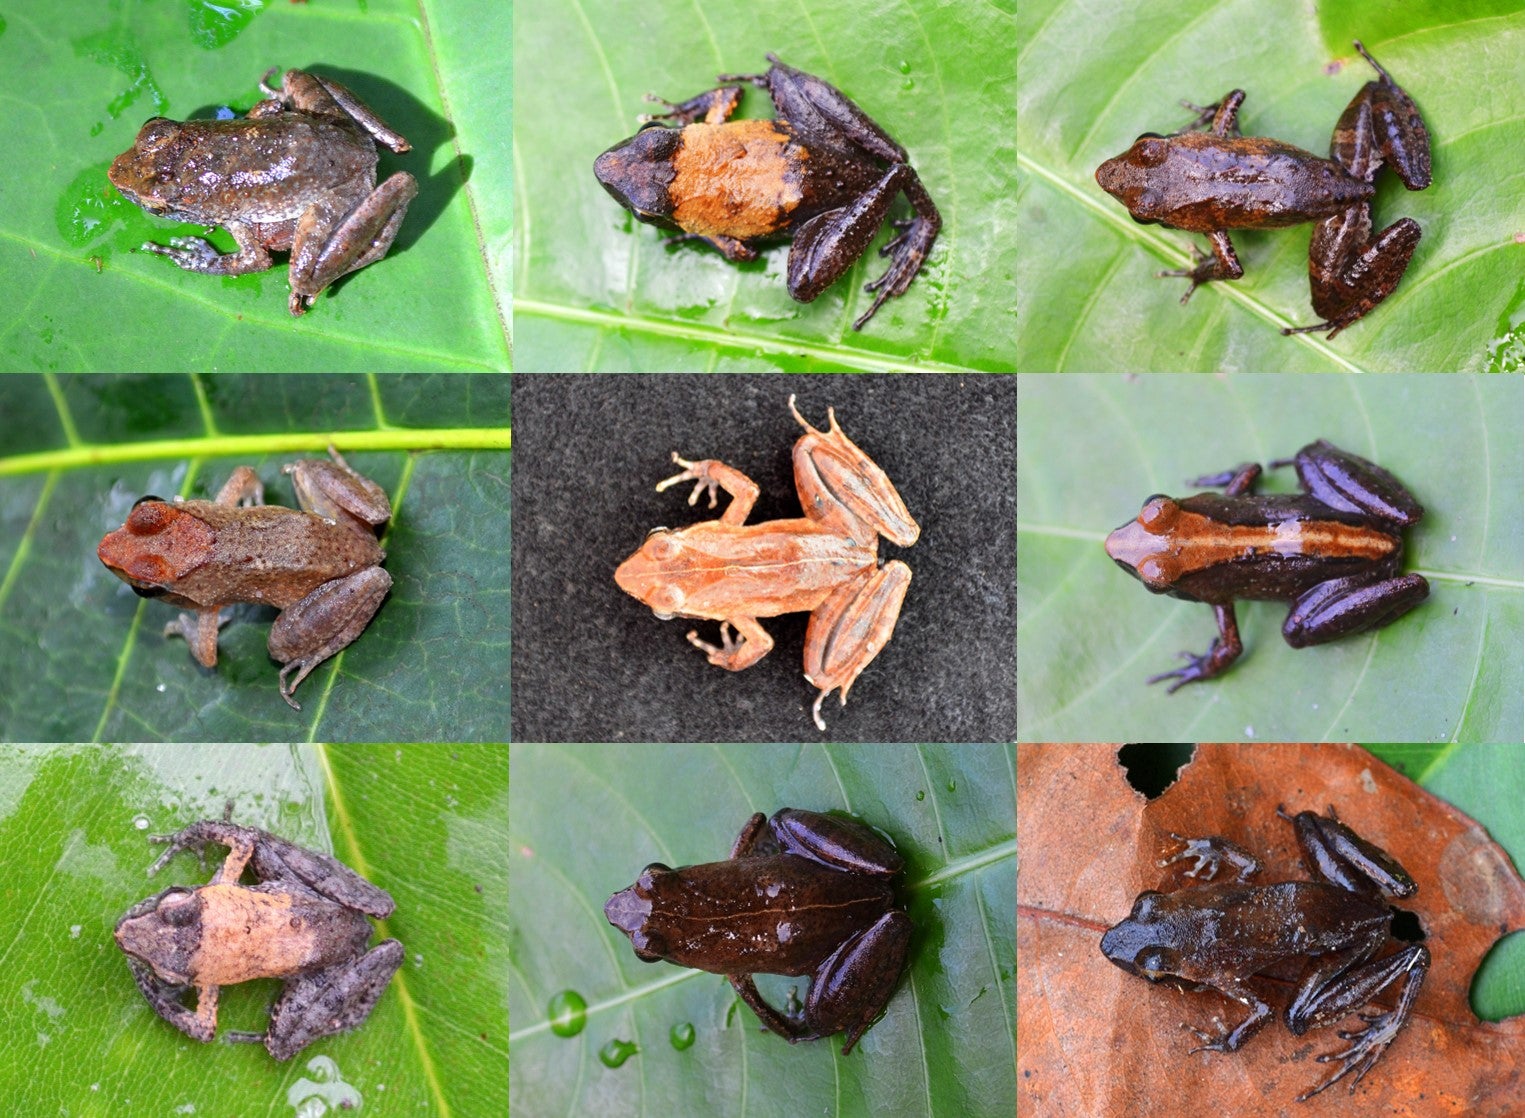 DNA barcoding revealed that these frogs all belong to the same species: the Eare